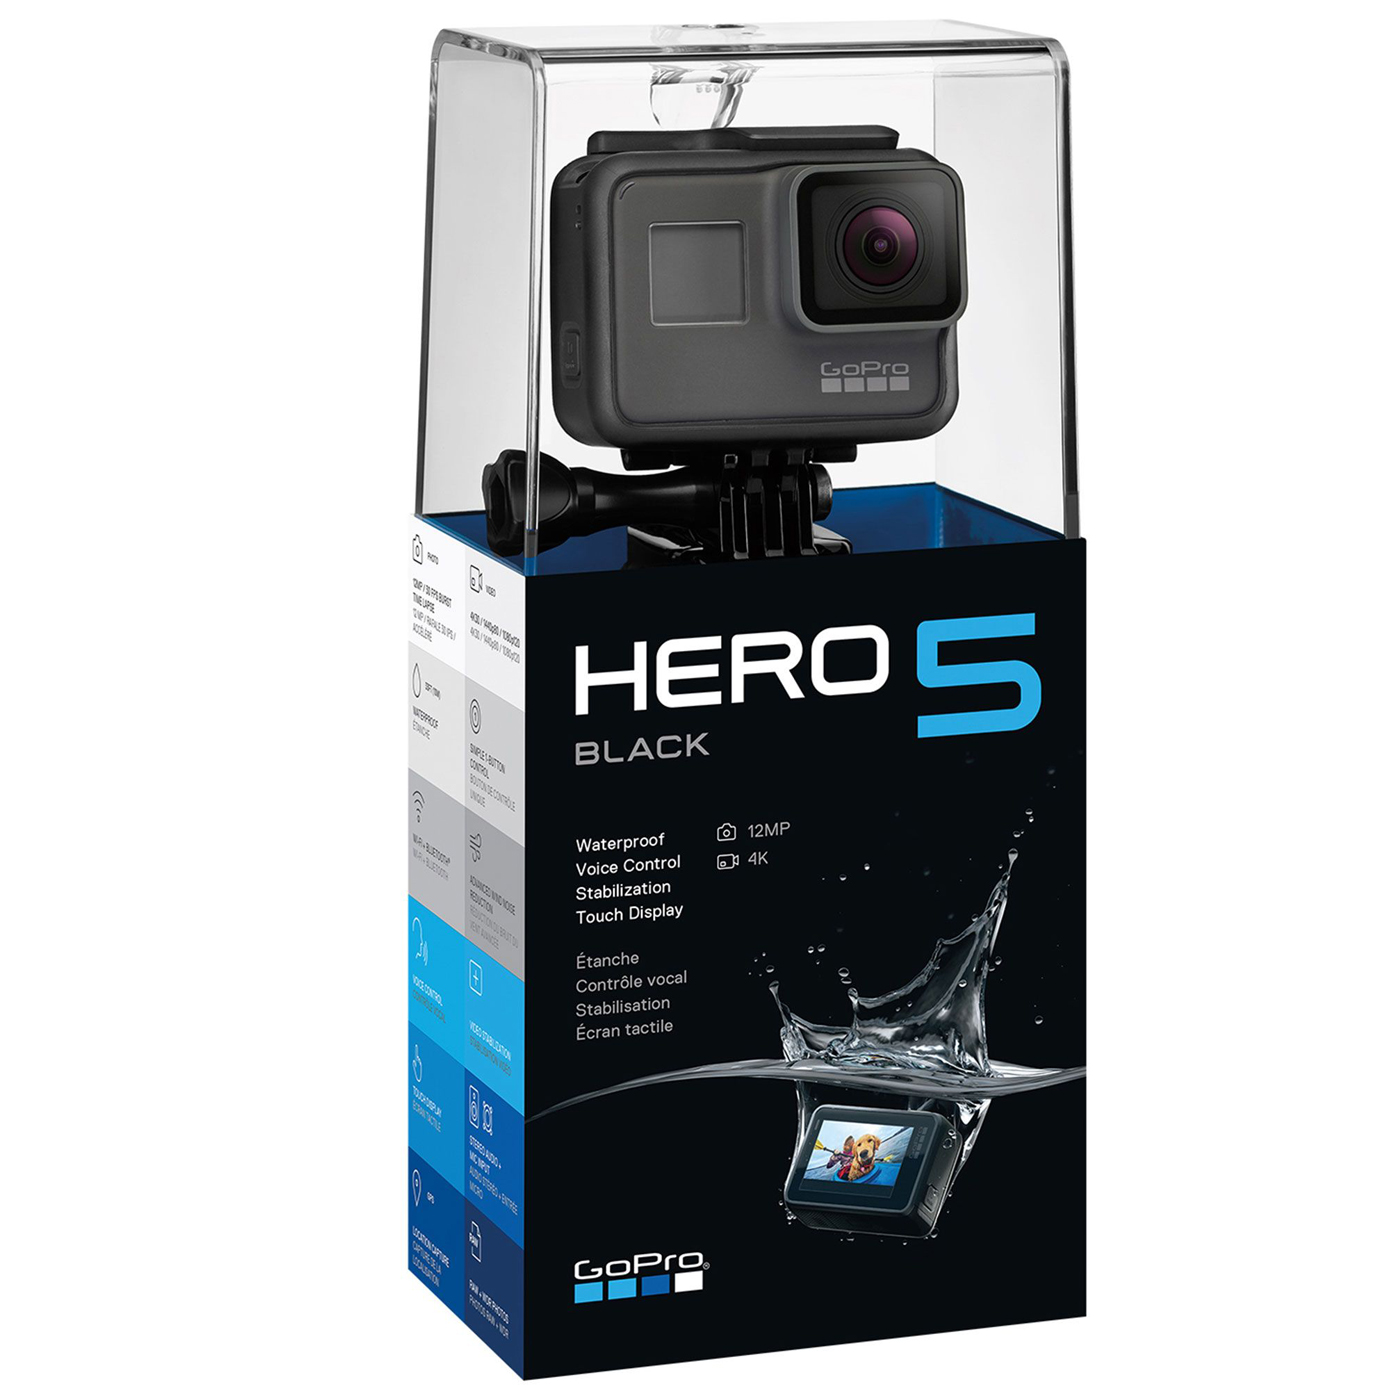 Download From Gopro Hero 5 To Mac